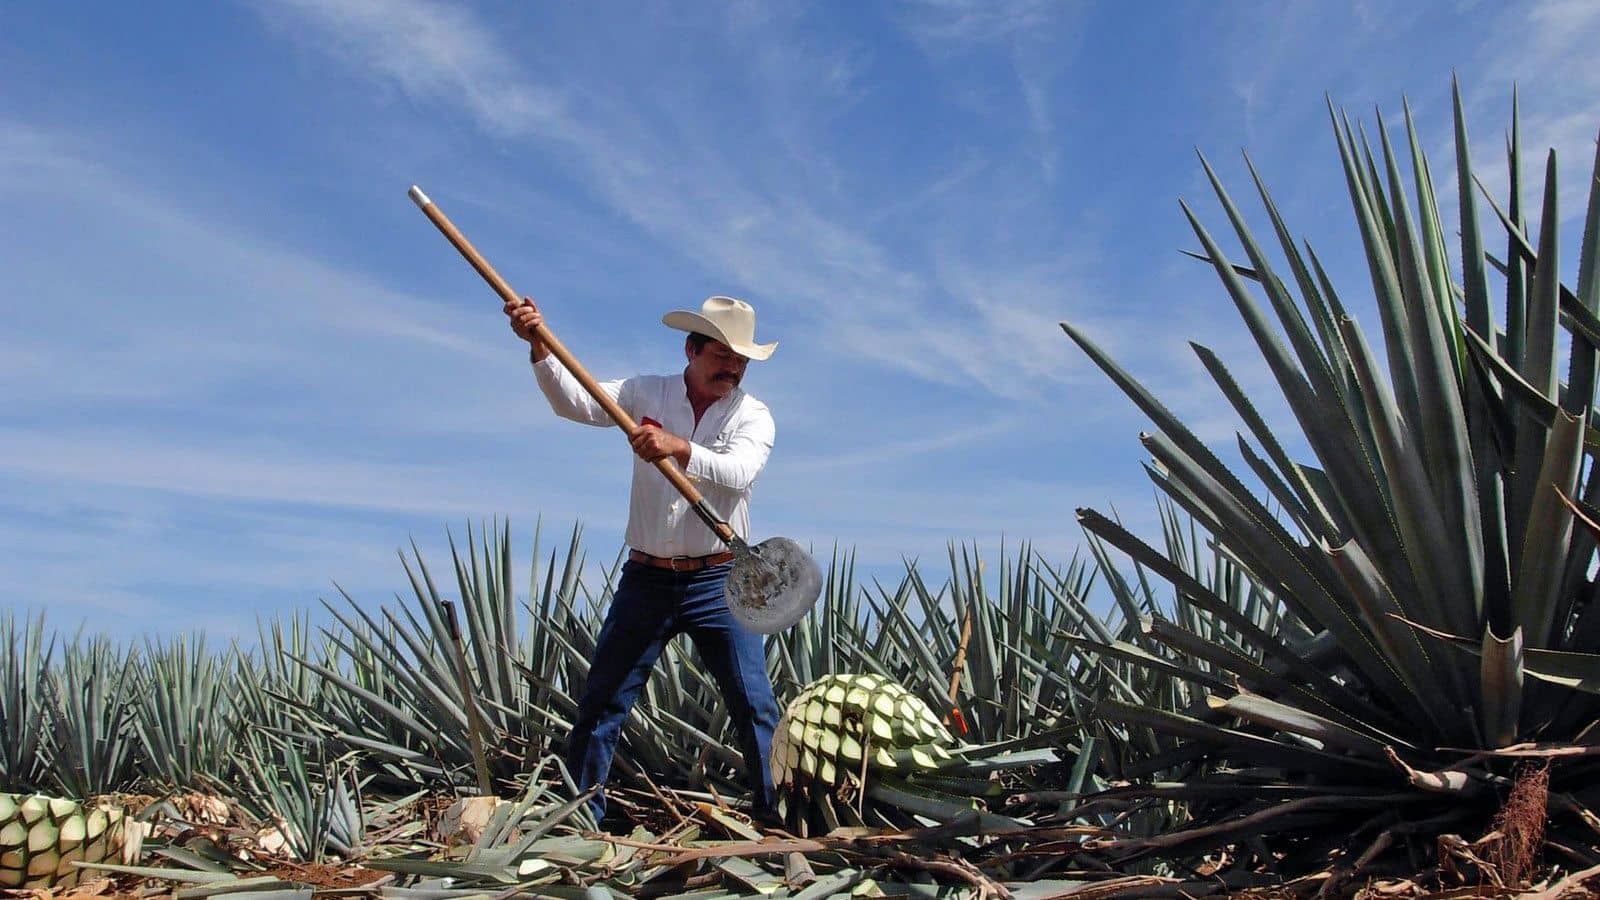 Man harvesting blue agave to make tequila